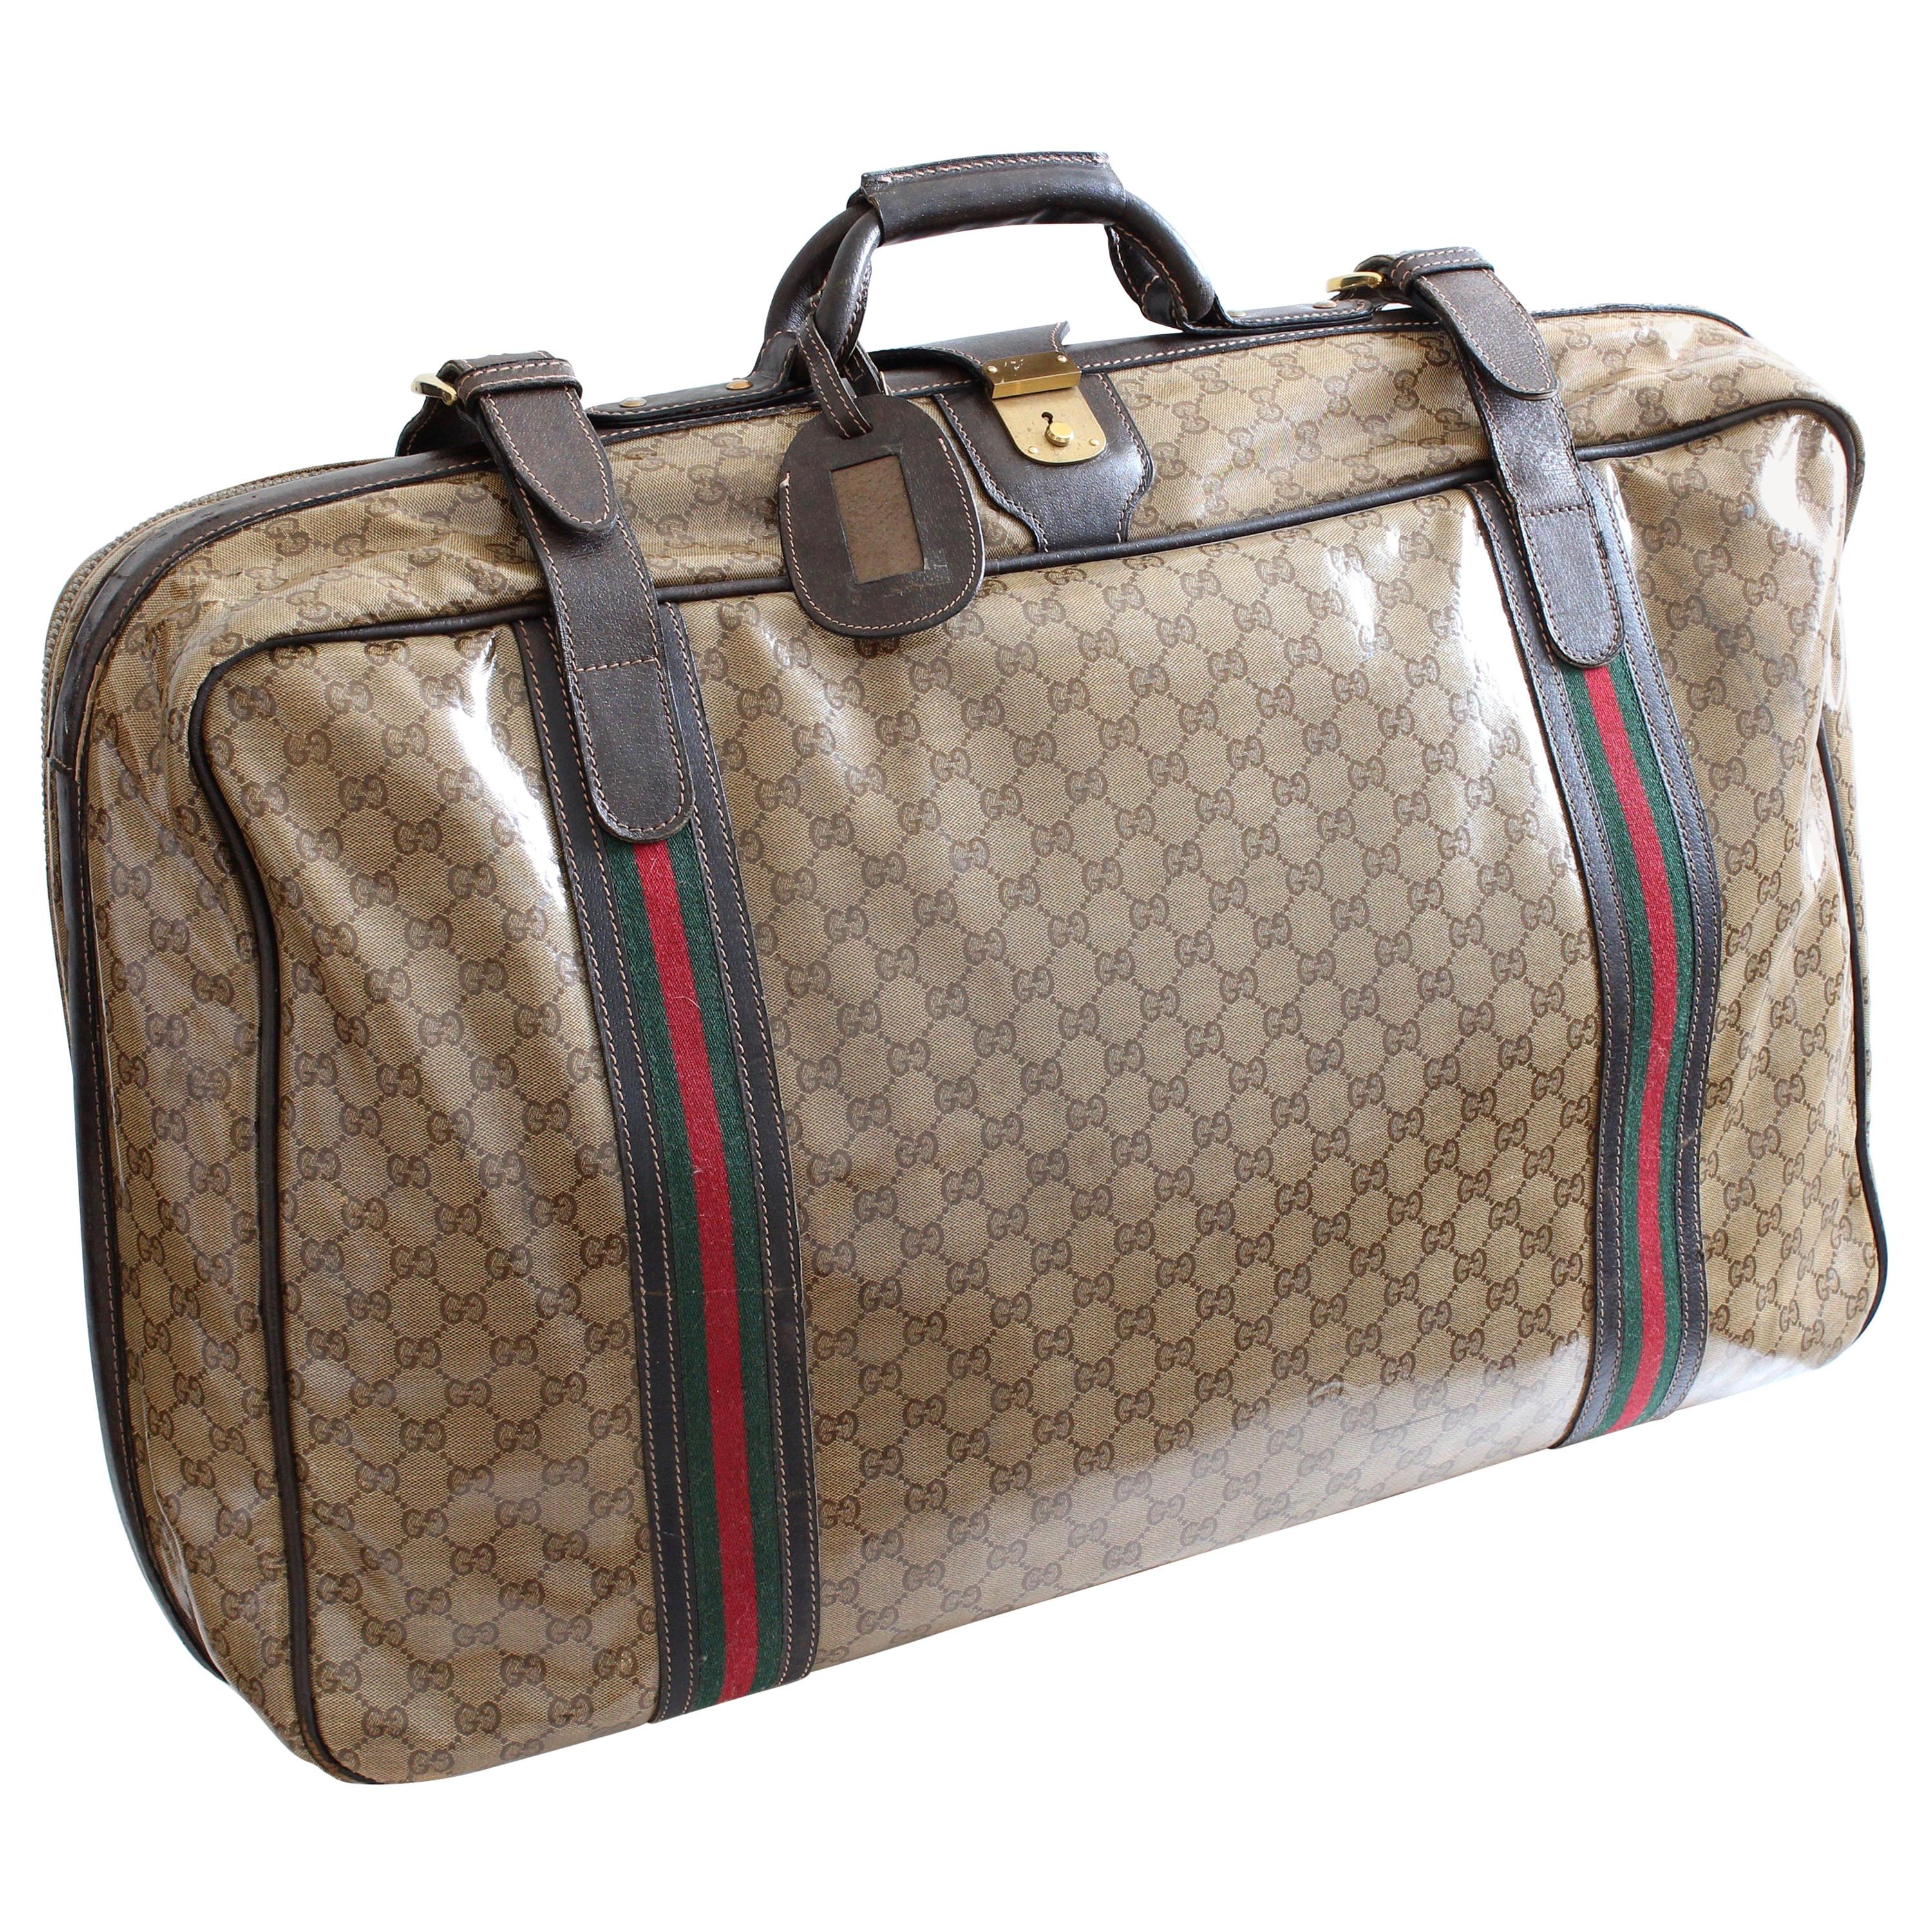 old gucci suitcase